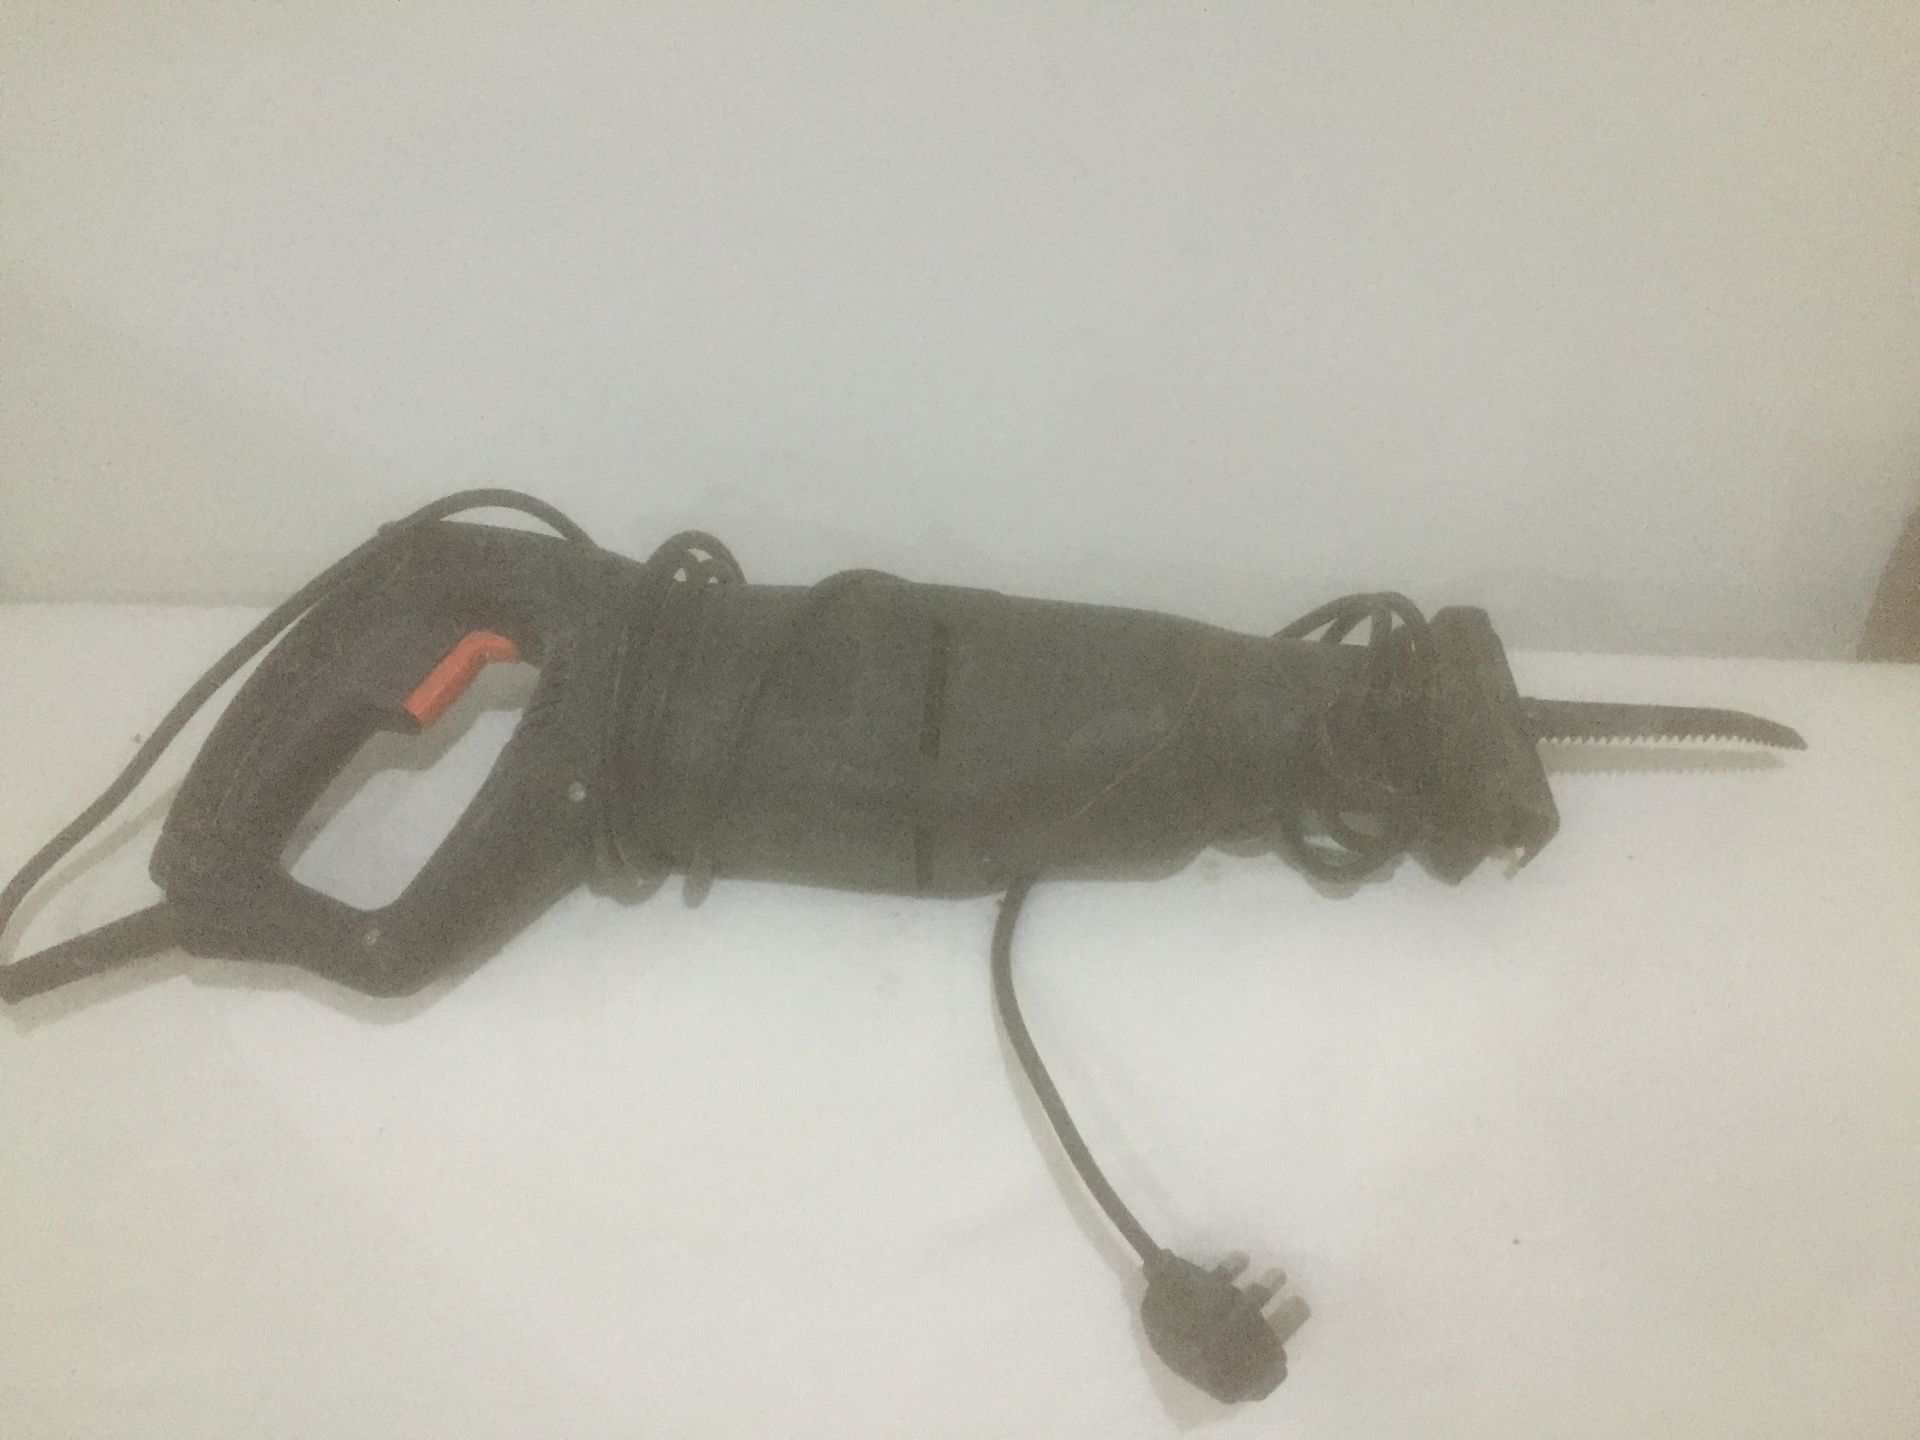 UNBRANDED RECIPROCATING SAW